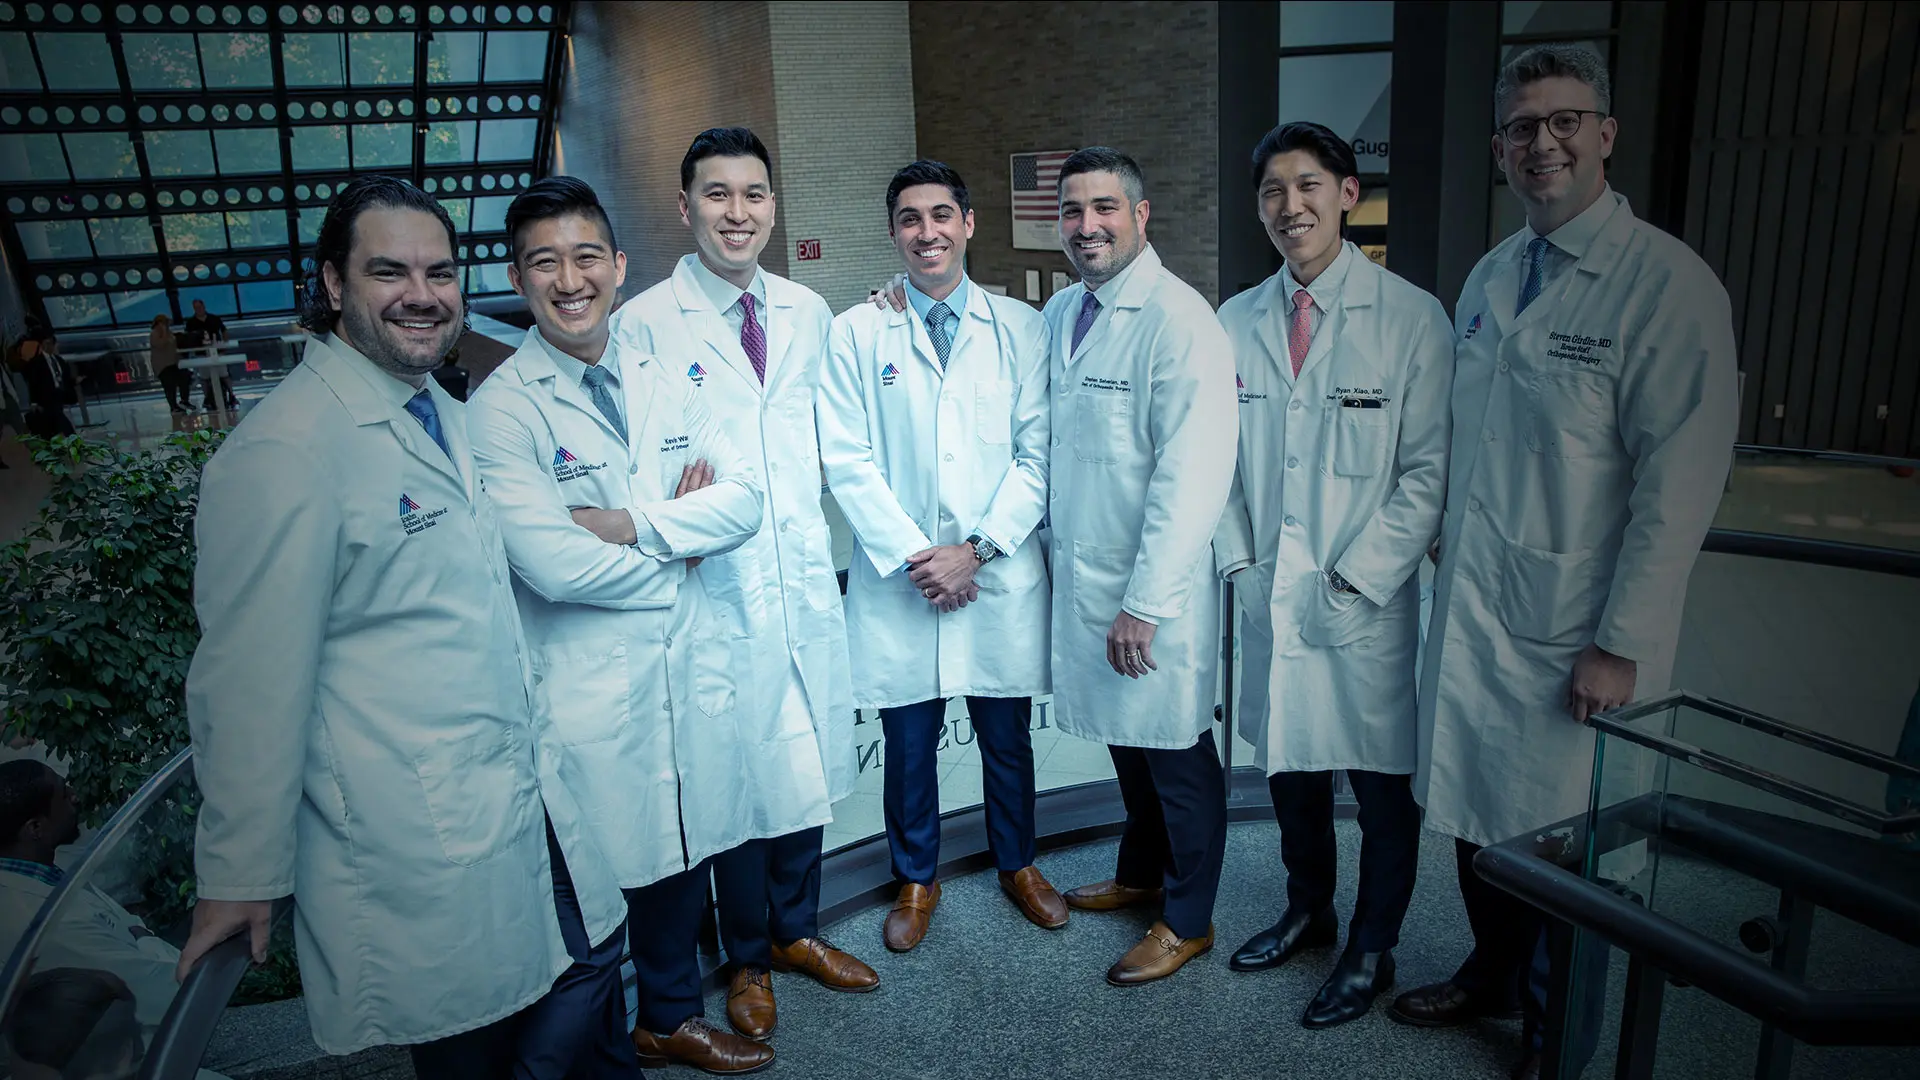 Mount Sinai’s Orthopedic Surgery Residency Program Embraces Innovation in Surgical Training